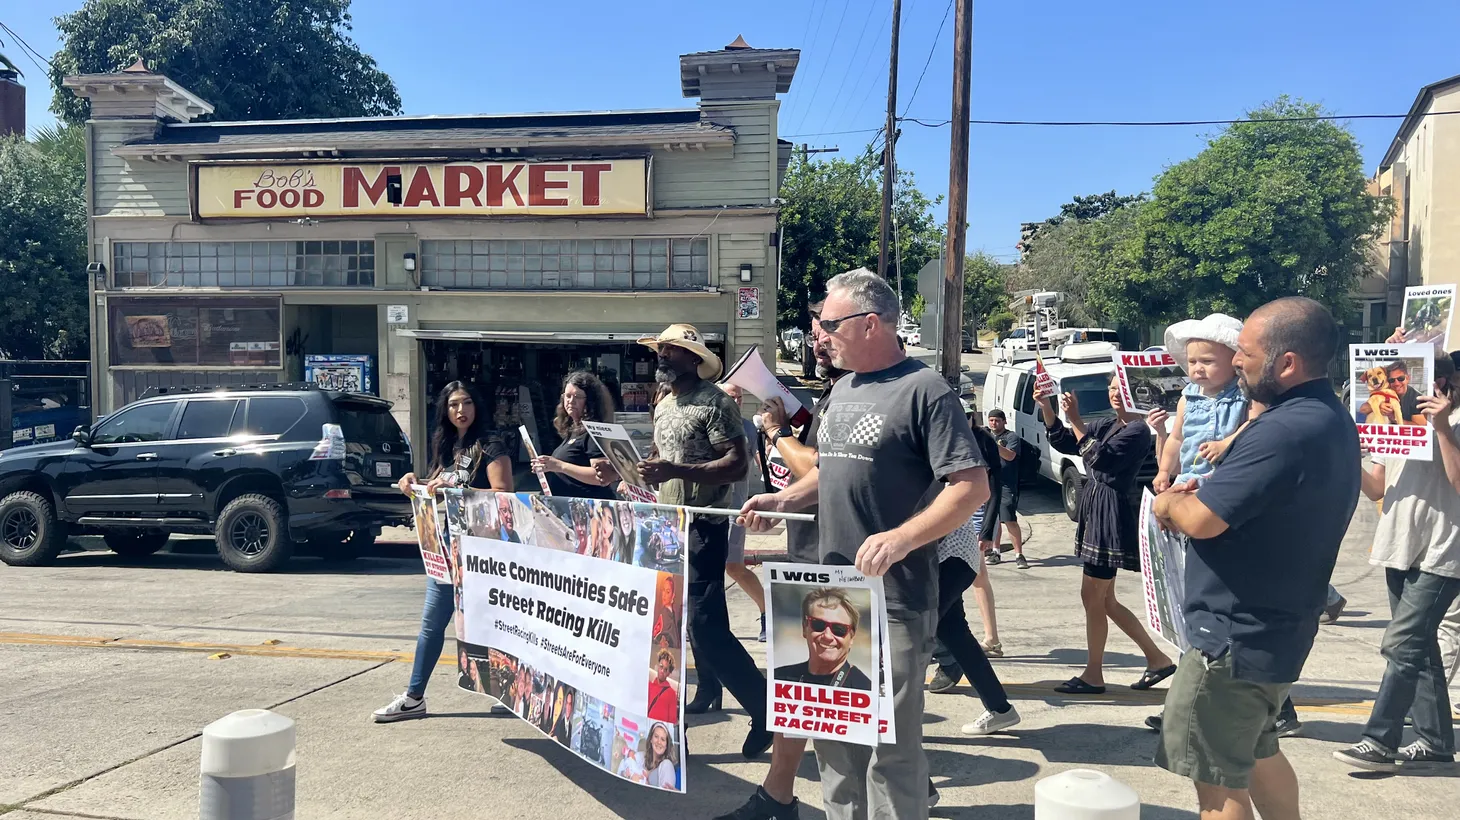 Angelino Heights residents carry signs saying “I was killed by street racing” and “make communities safe, street racing kills,” as they march in front of Bob’s Food Market, aka Toretto's Market & Deli from “The Fast and the Furious.”